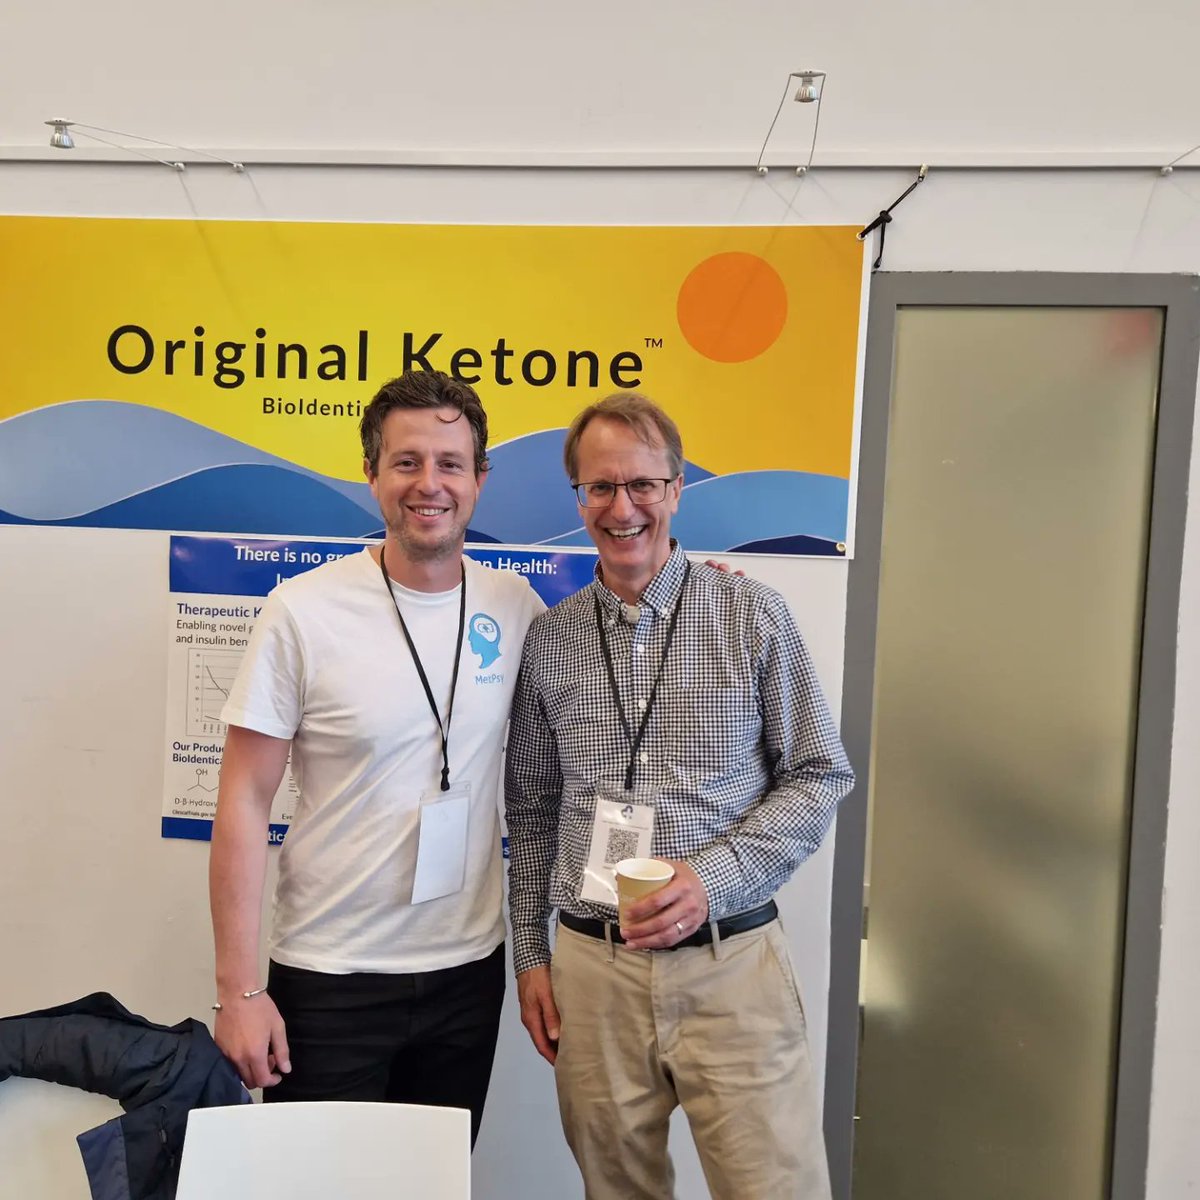 Great weekend exhibiting MetPsy at @phcukorg's brilliant conference in London. Finally met the great and powerful @anthony_chaffee in person after having long deep conversations online for our podcasts. I got to say thank you to @garytaubes for his books which led to my mental